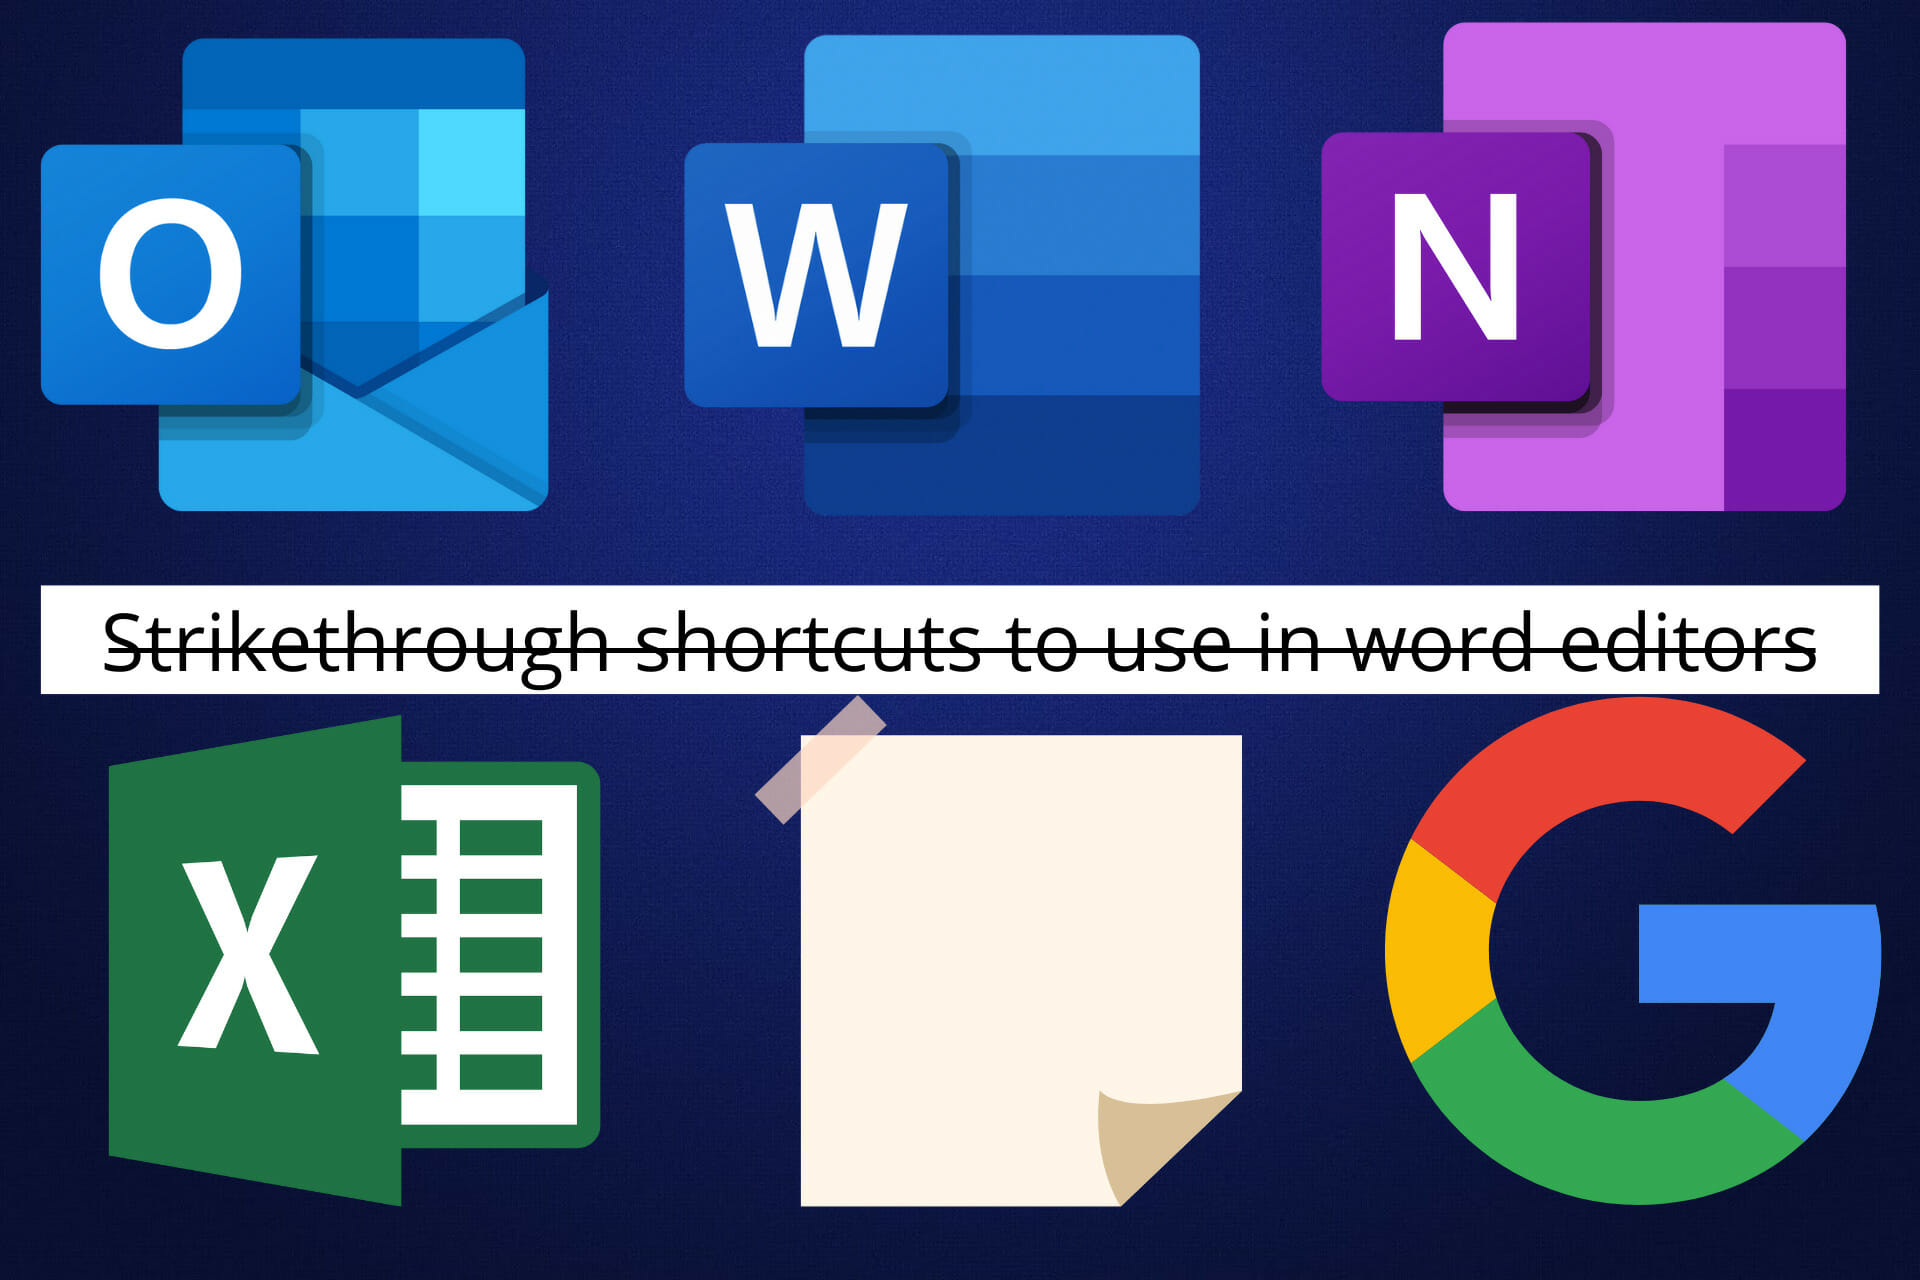 Strikethrough shortcuts to use in word editors